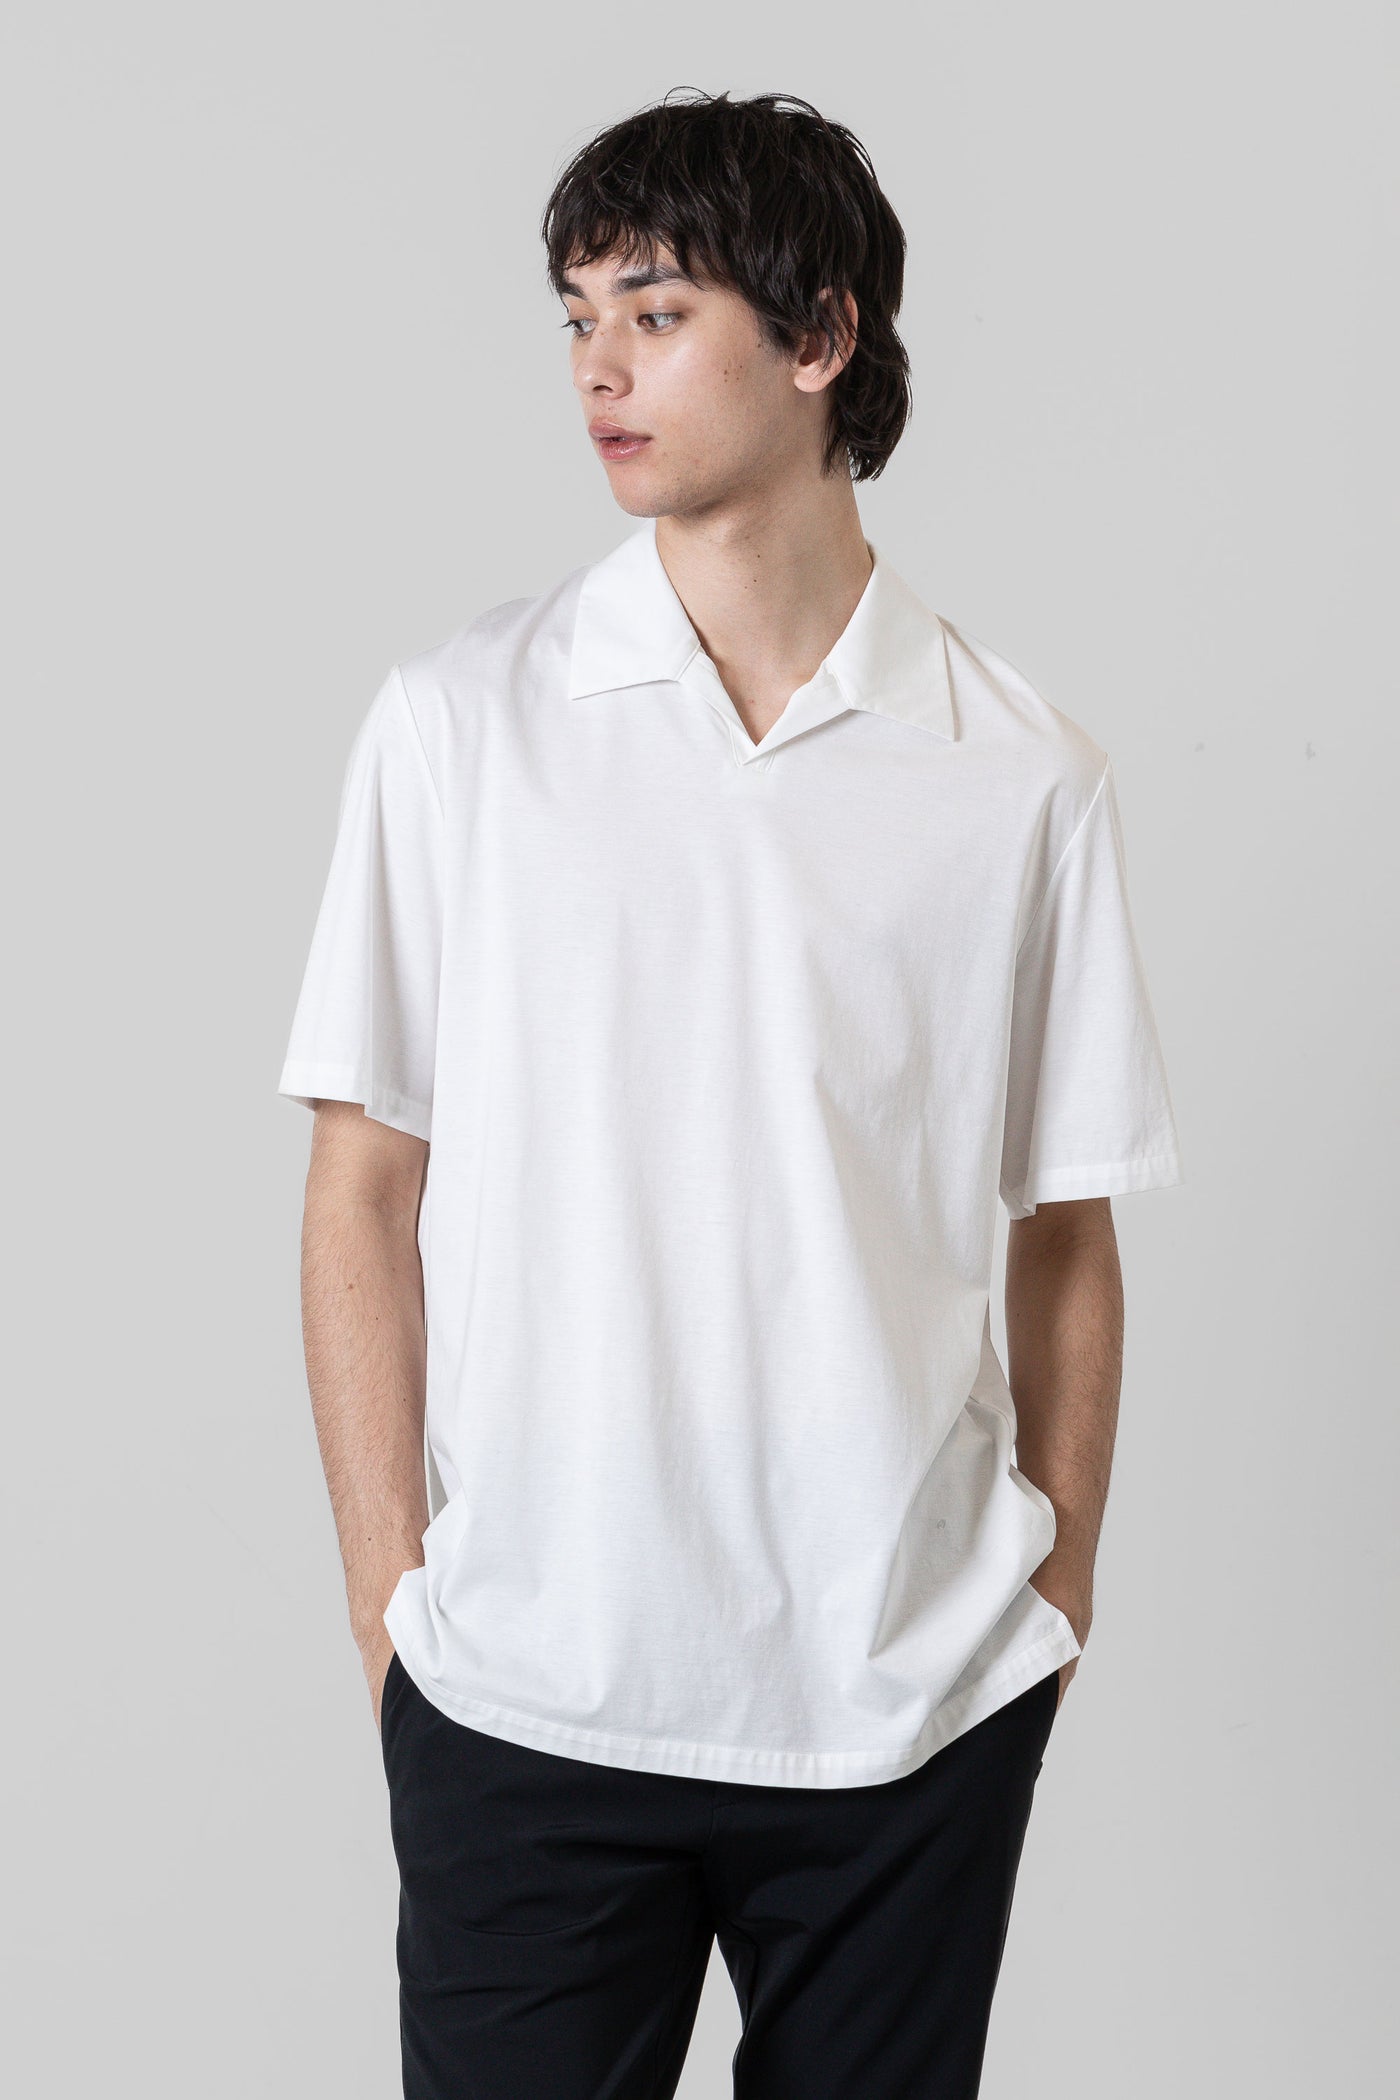 Released in February AS41-015 Cotton Jersey Cross Polo Shirt